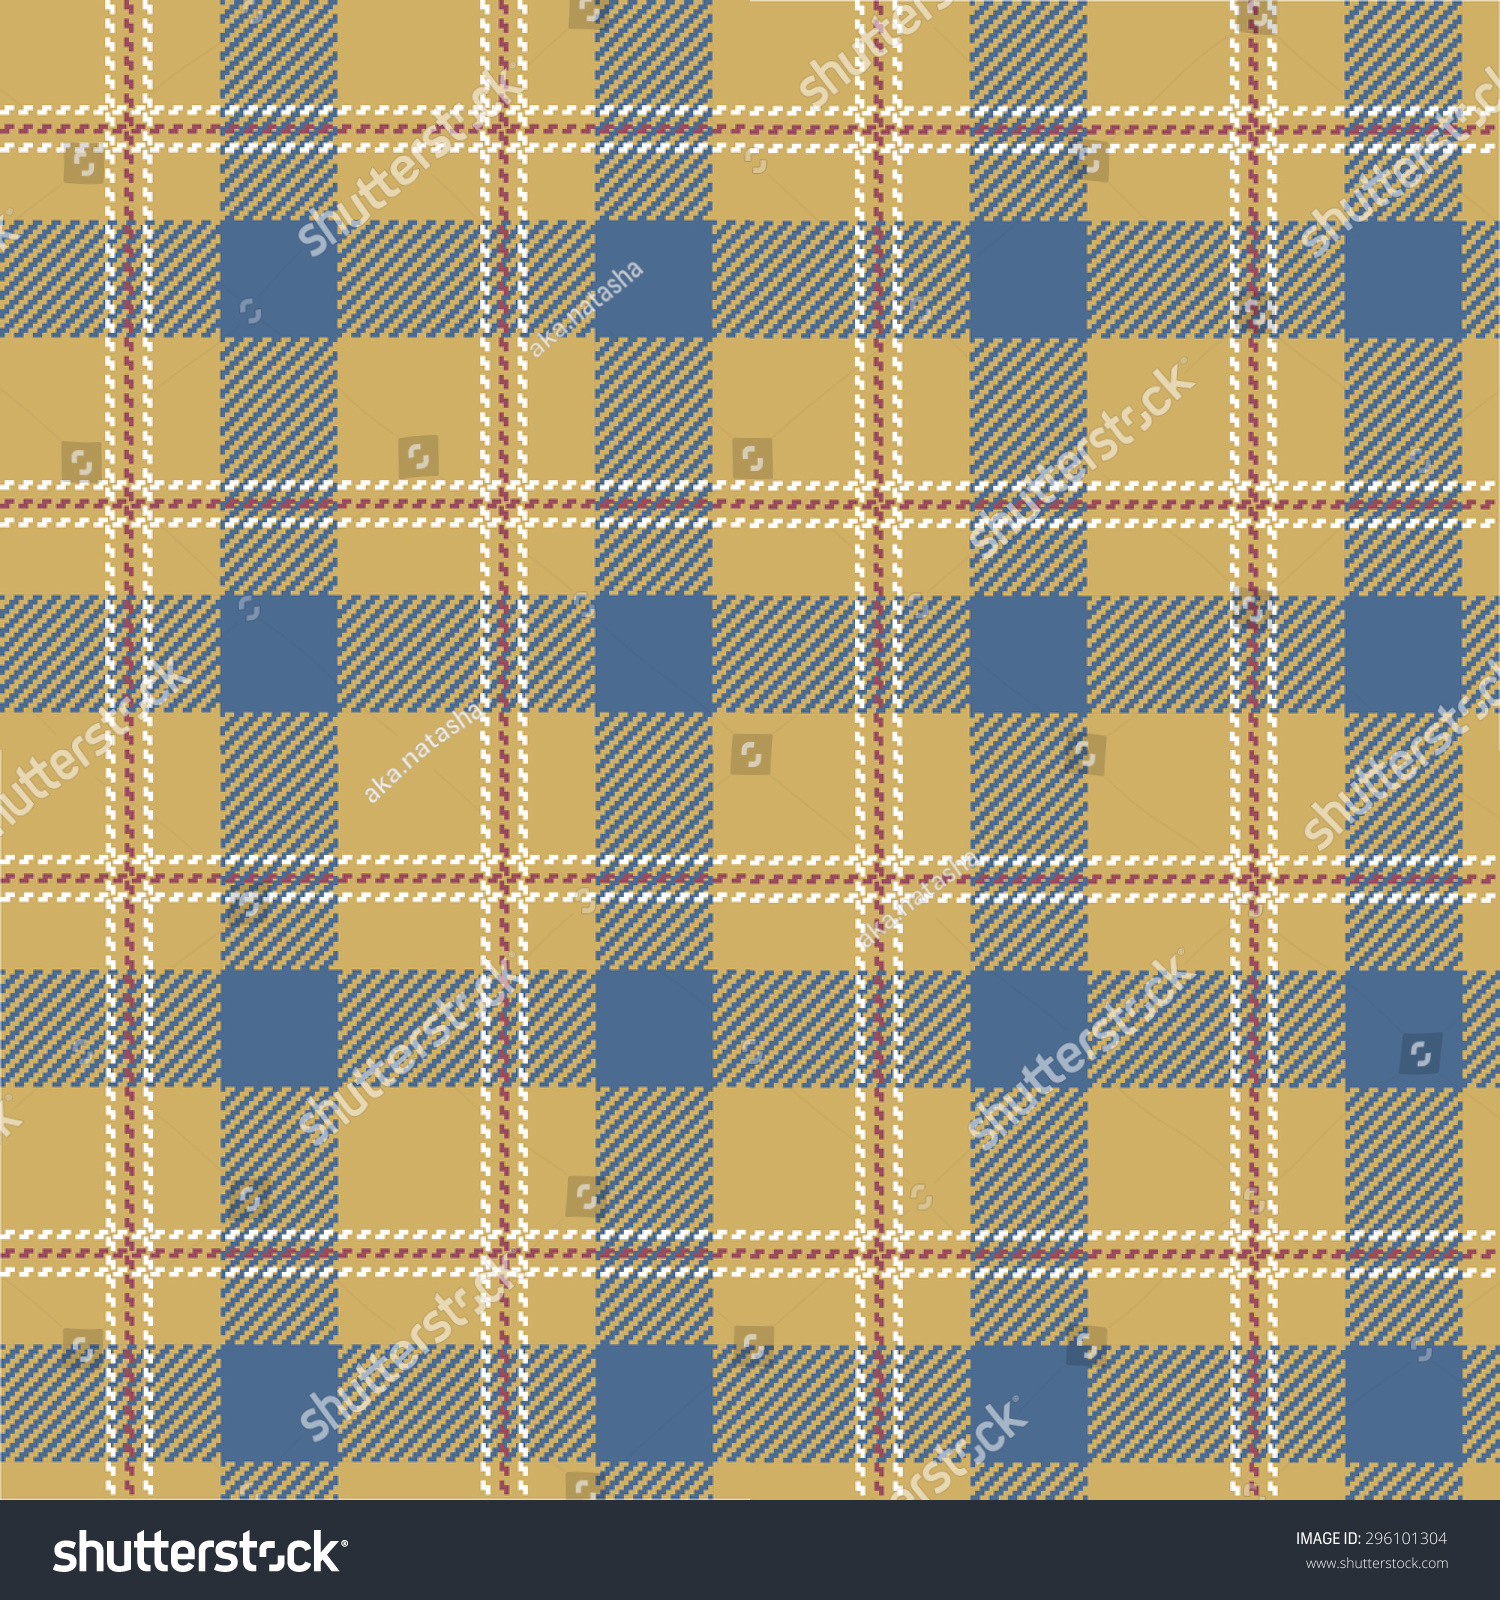 Checked Stitched Plaid Seamless Repeating Fabric Stock Vector ...